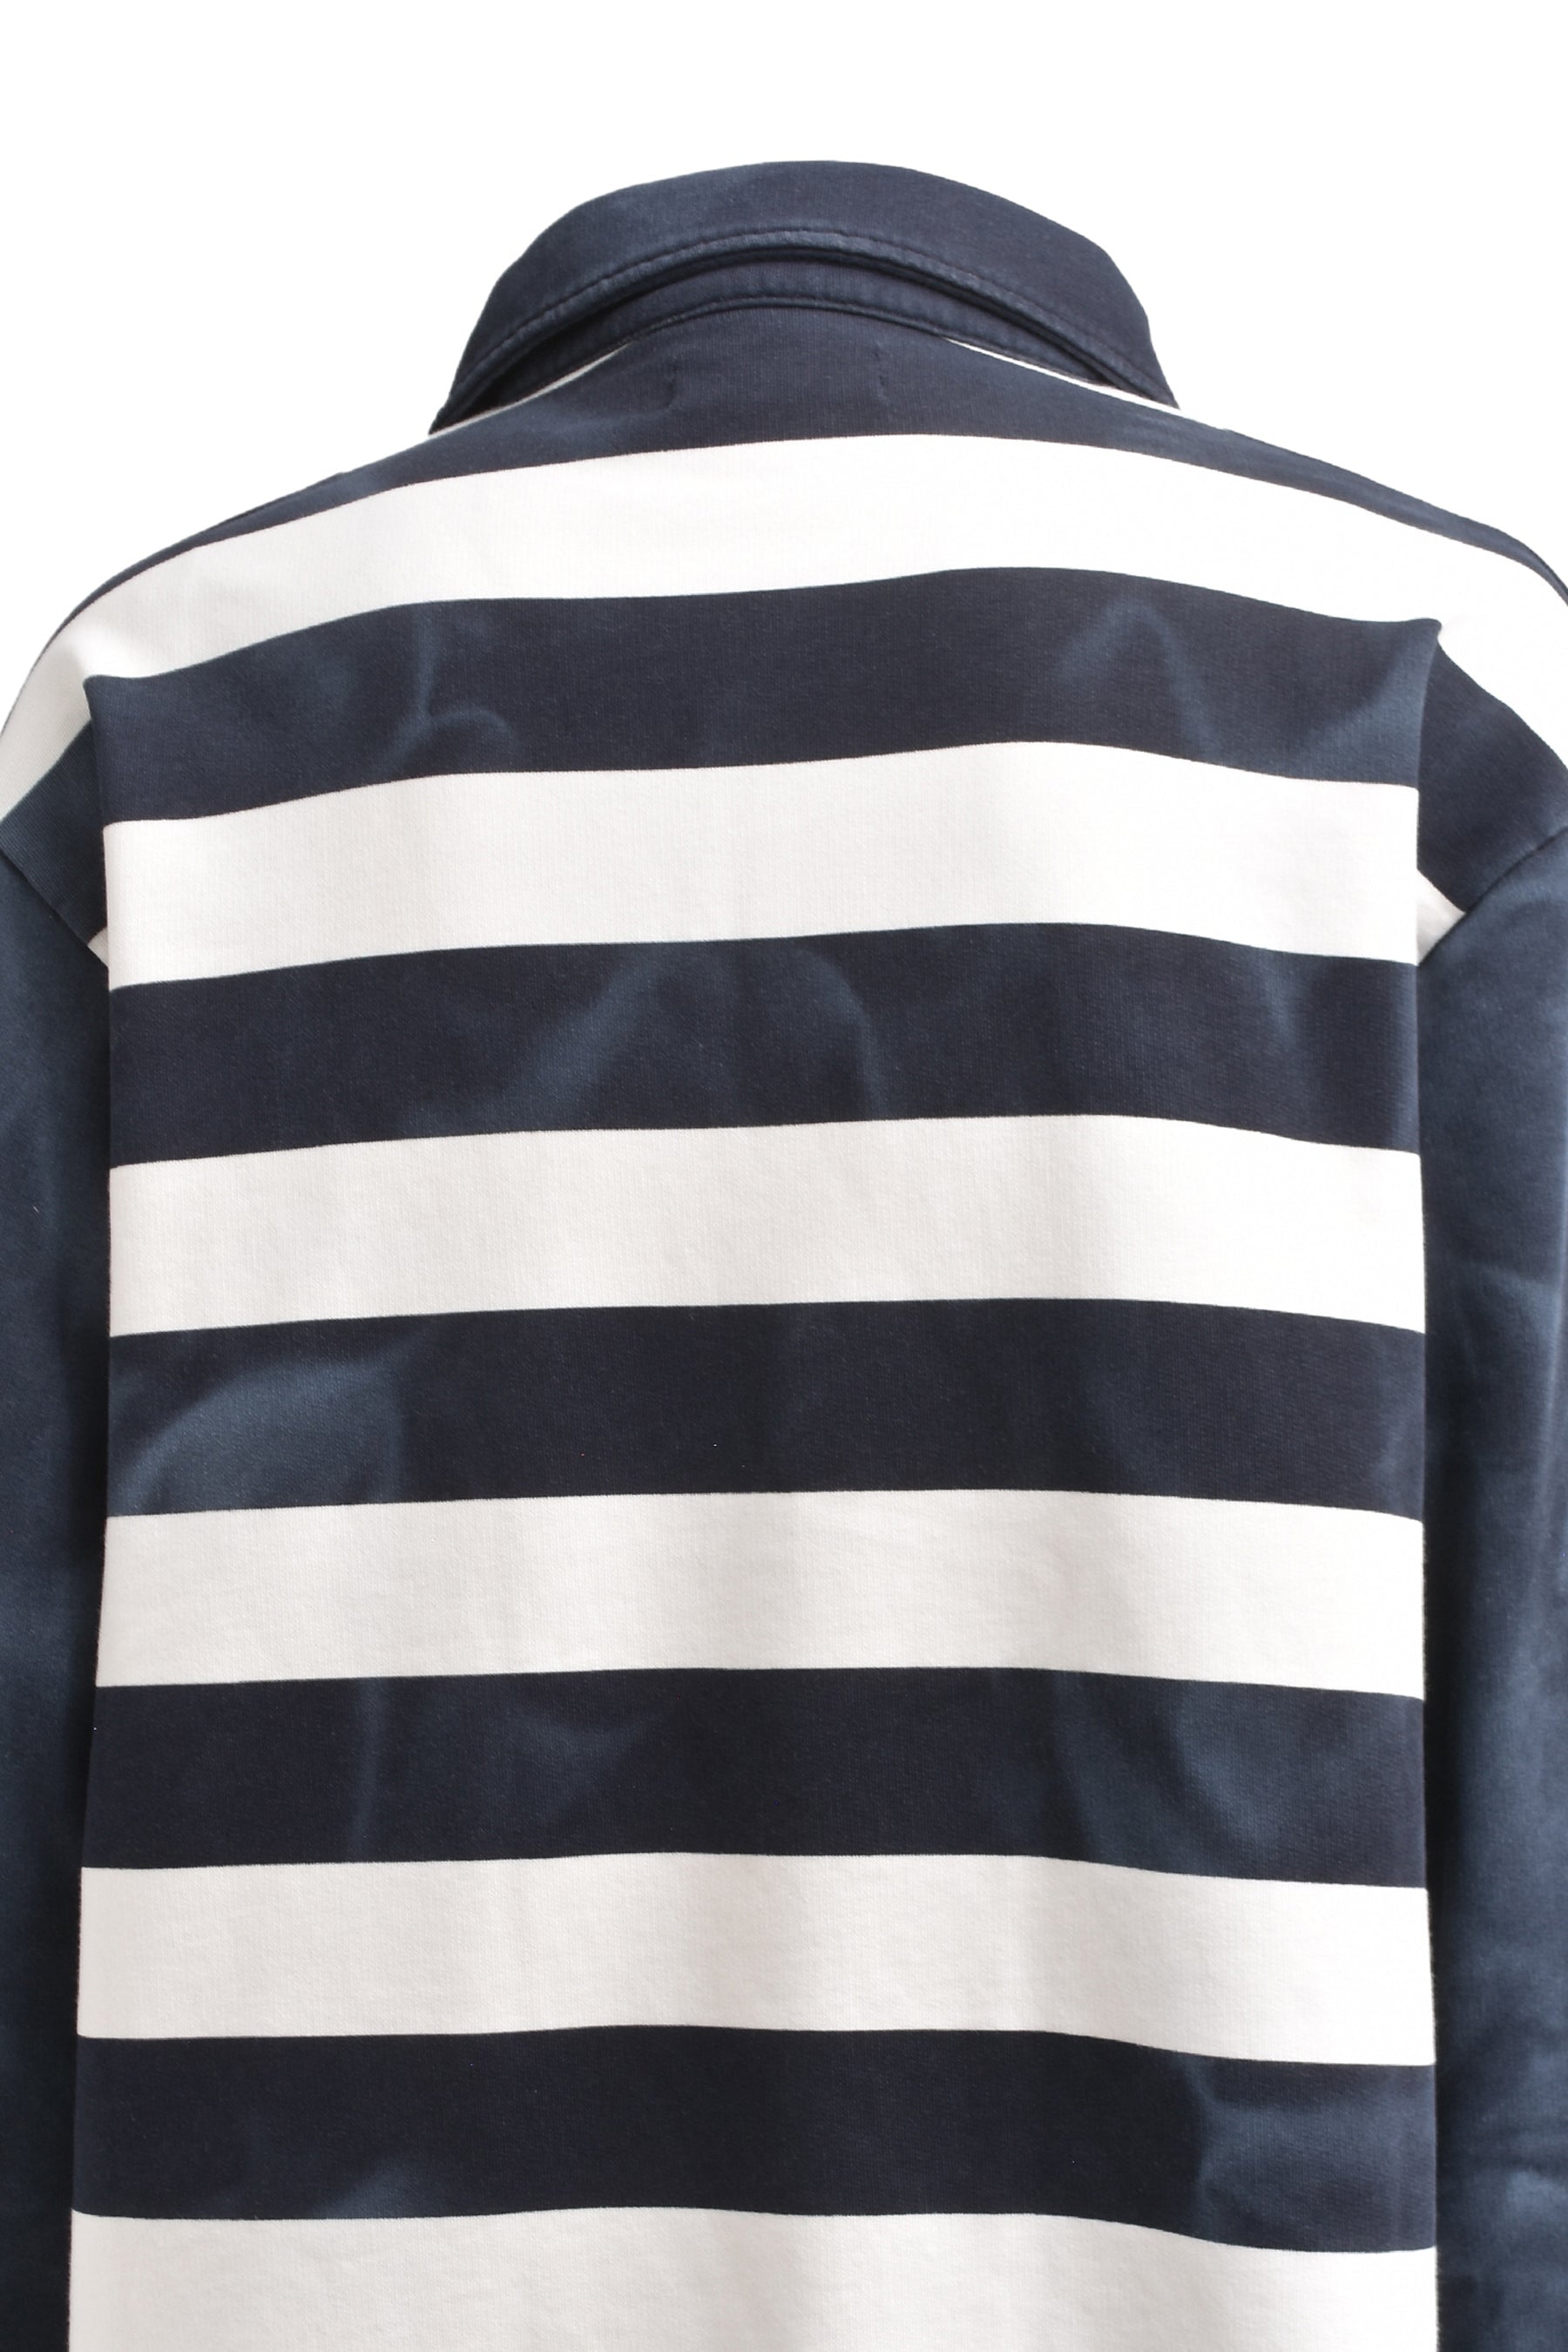 ZIP UP POLO / NVY WHT STRIPES